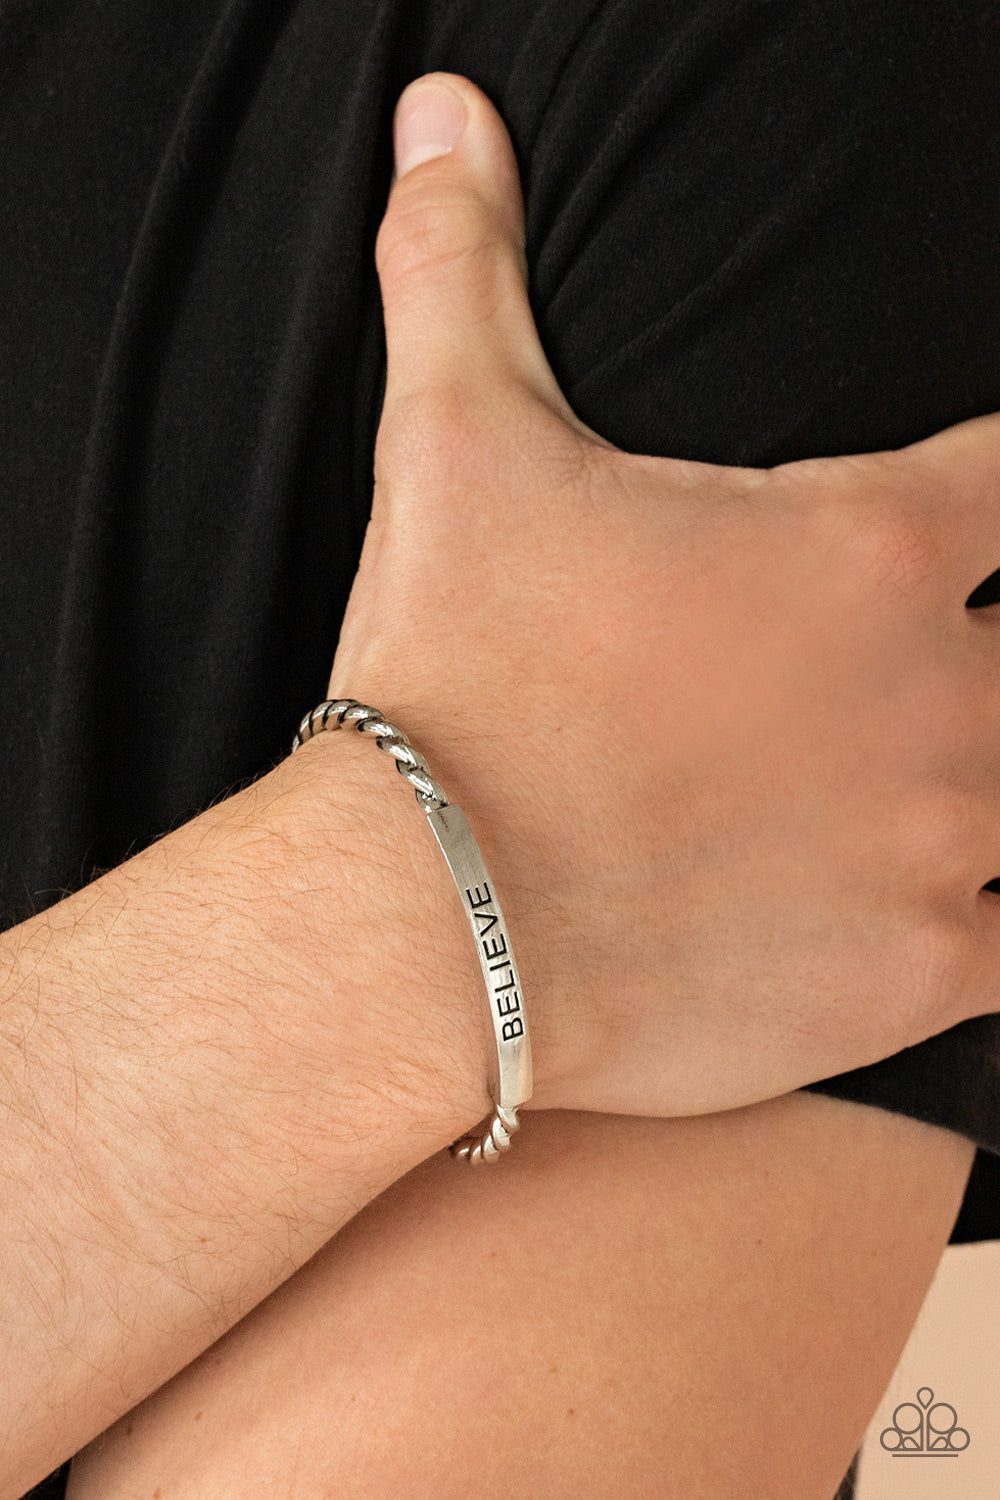 Keep Calm and Believe - Silver Bracelet